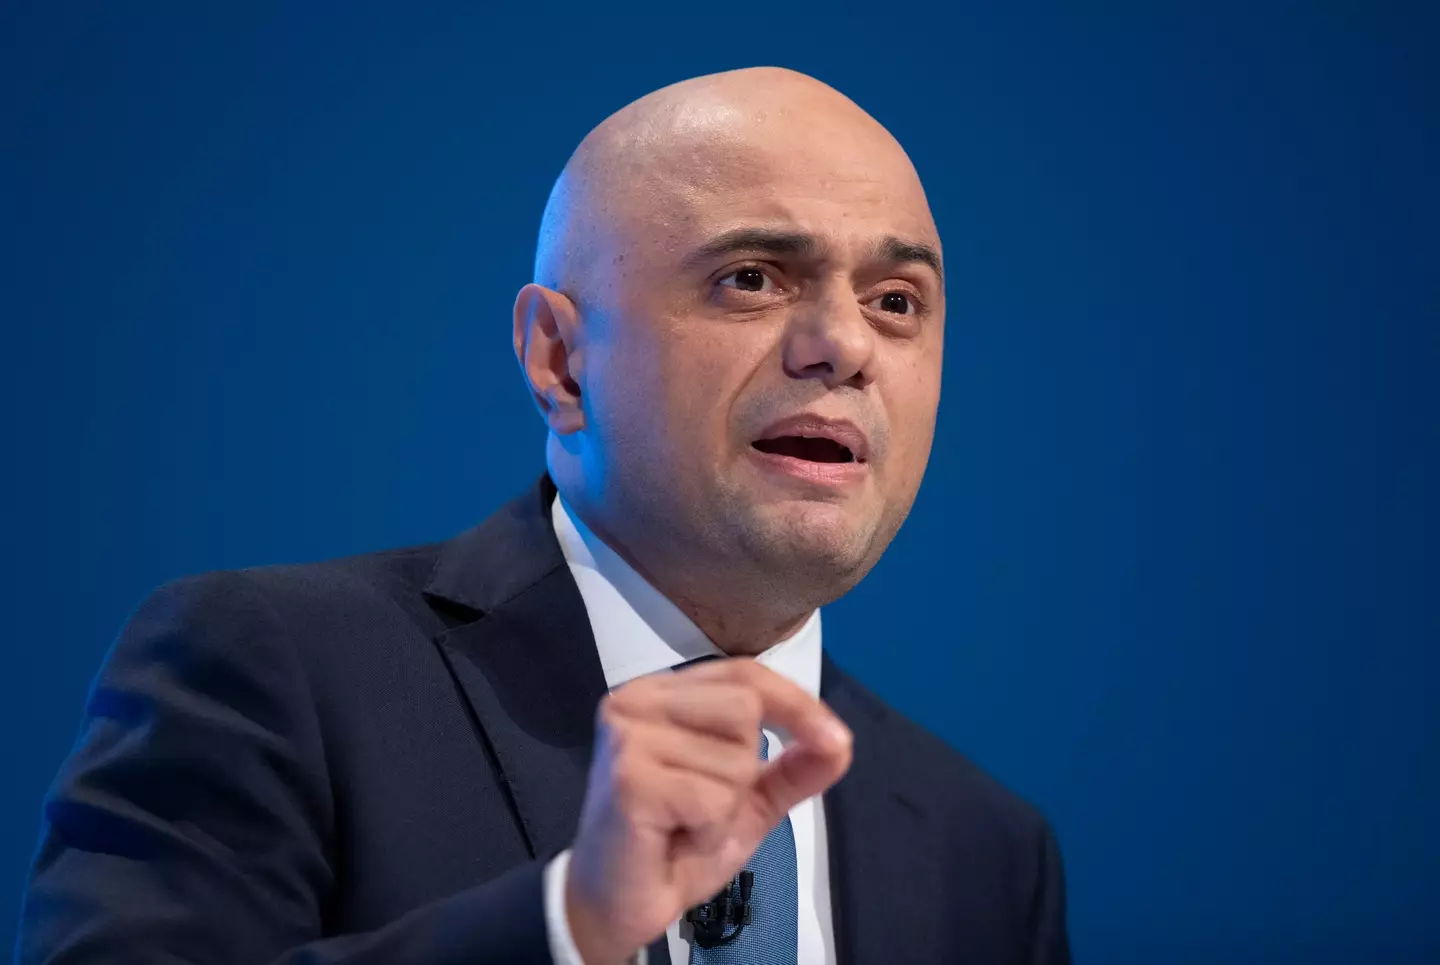 Sajid Javid has called for major reform of the Government's tobacco industry policies.